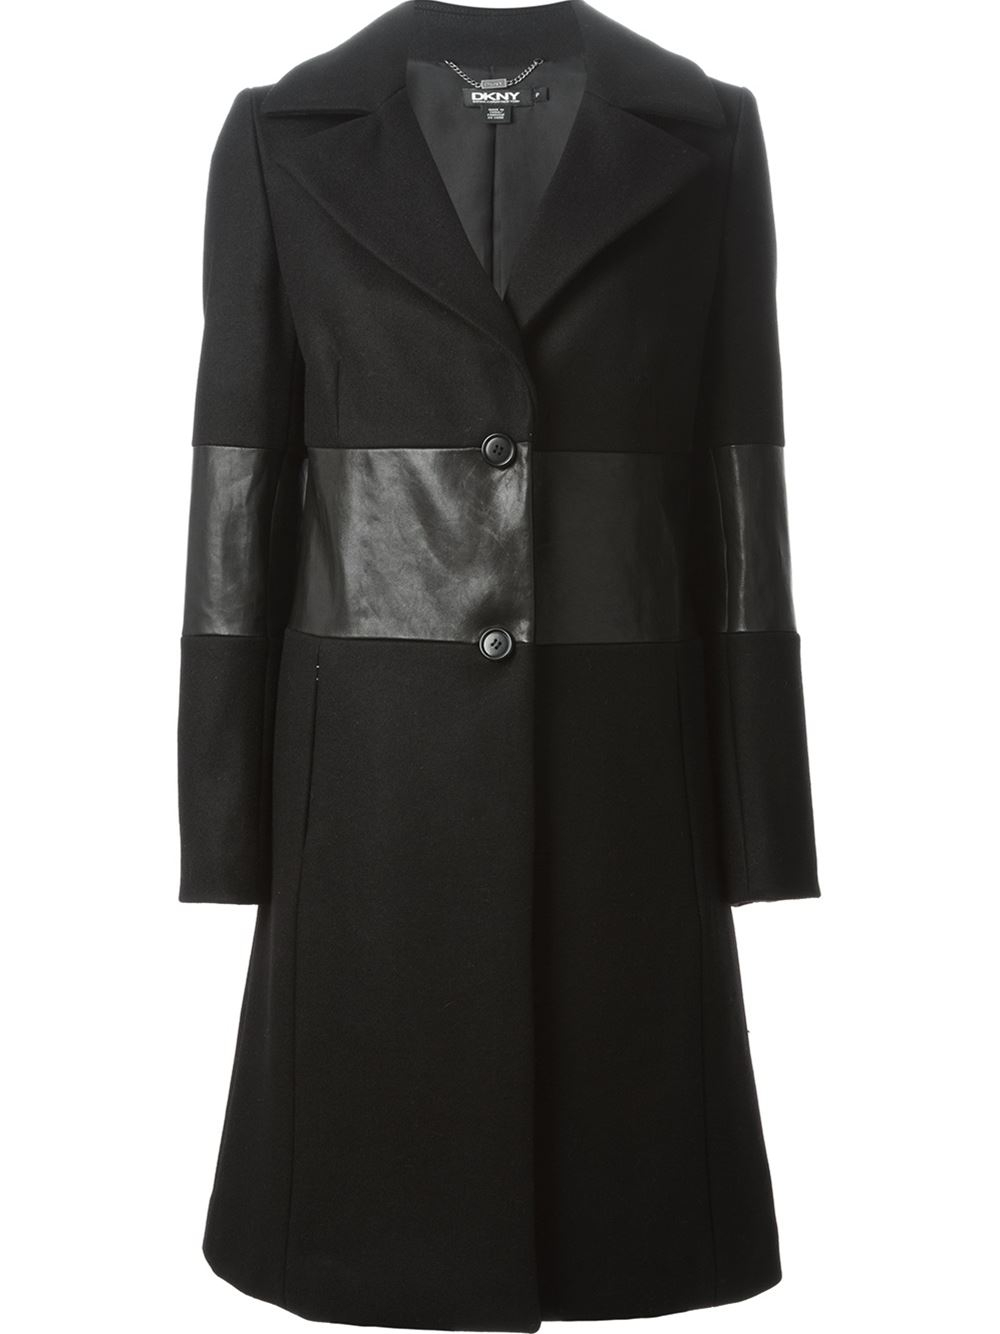 Dkny Leather Panel Coat in Black | Lyst